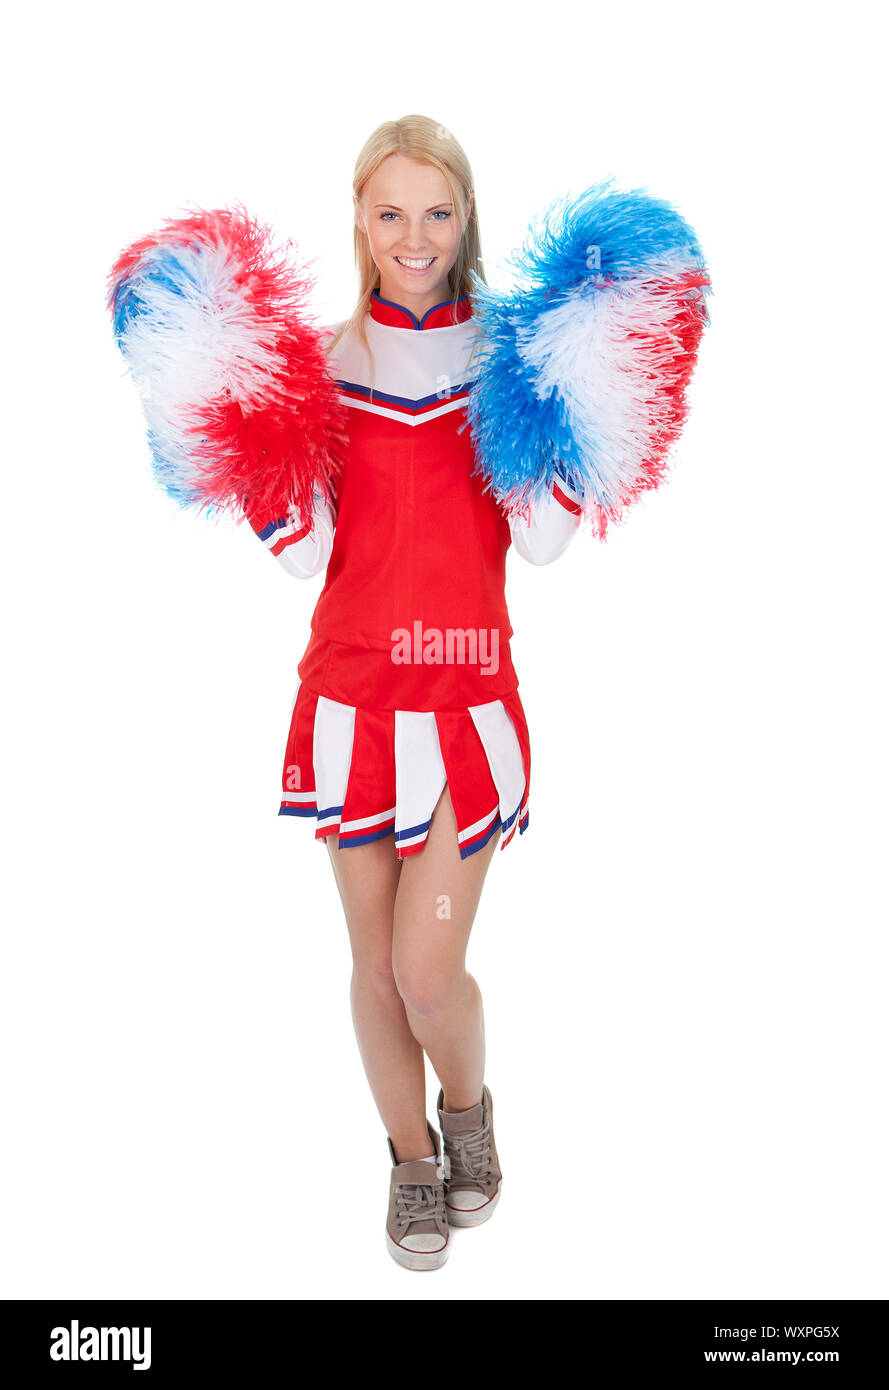 Smiling beautiful cheerleader with pompoms. Stock Photo